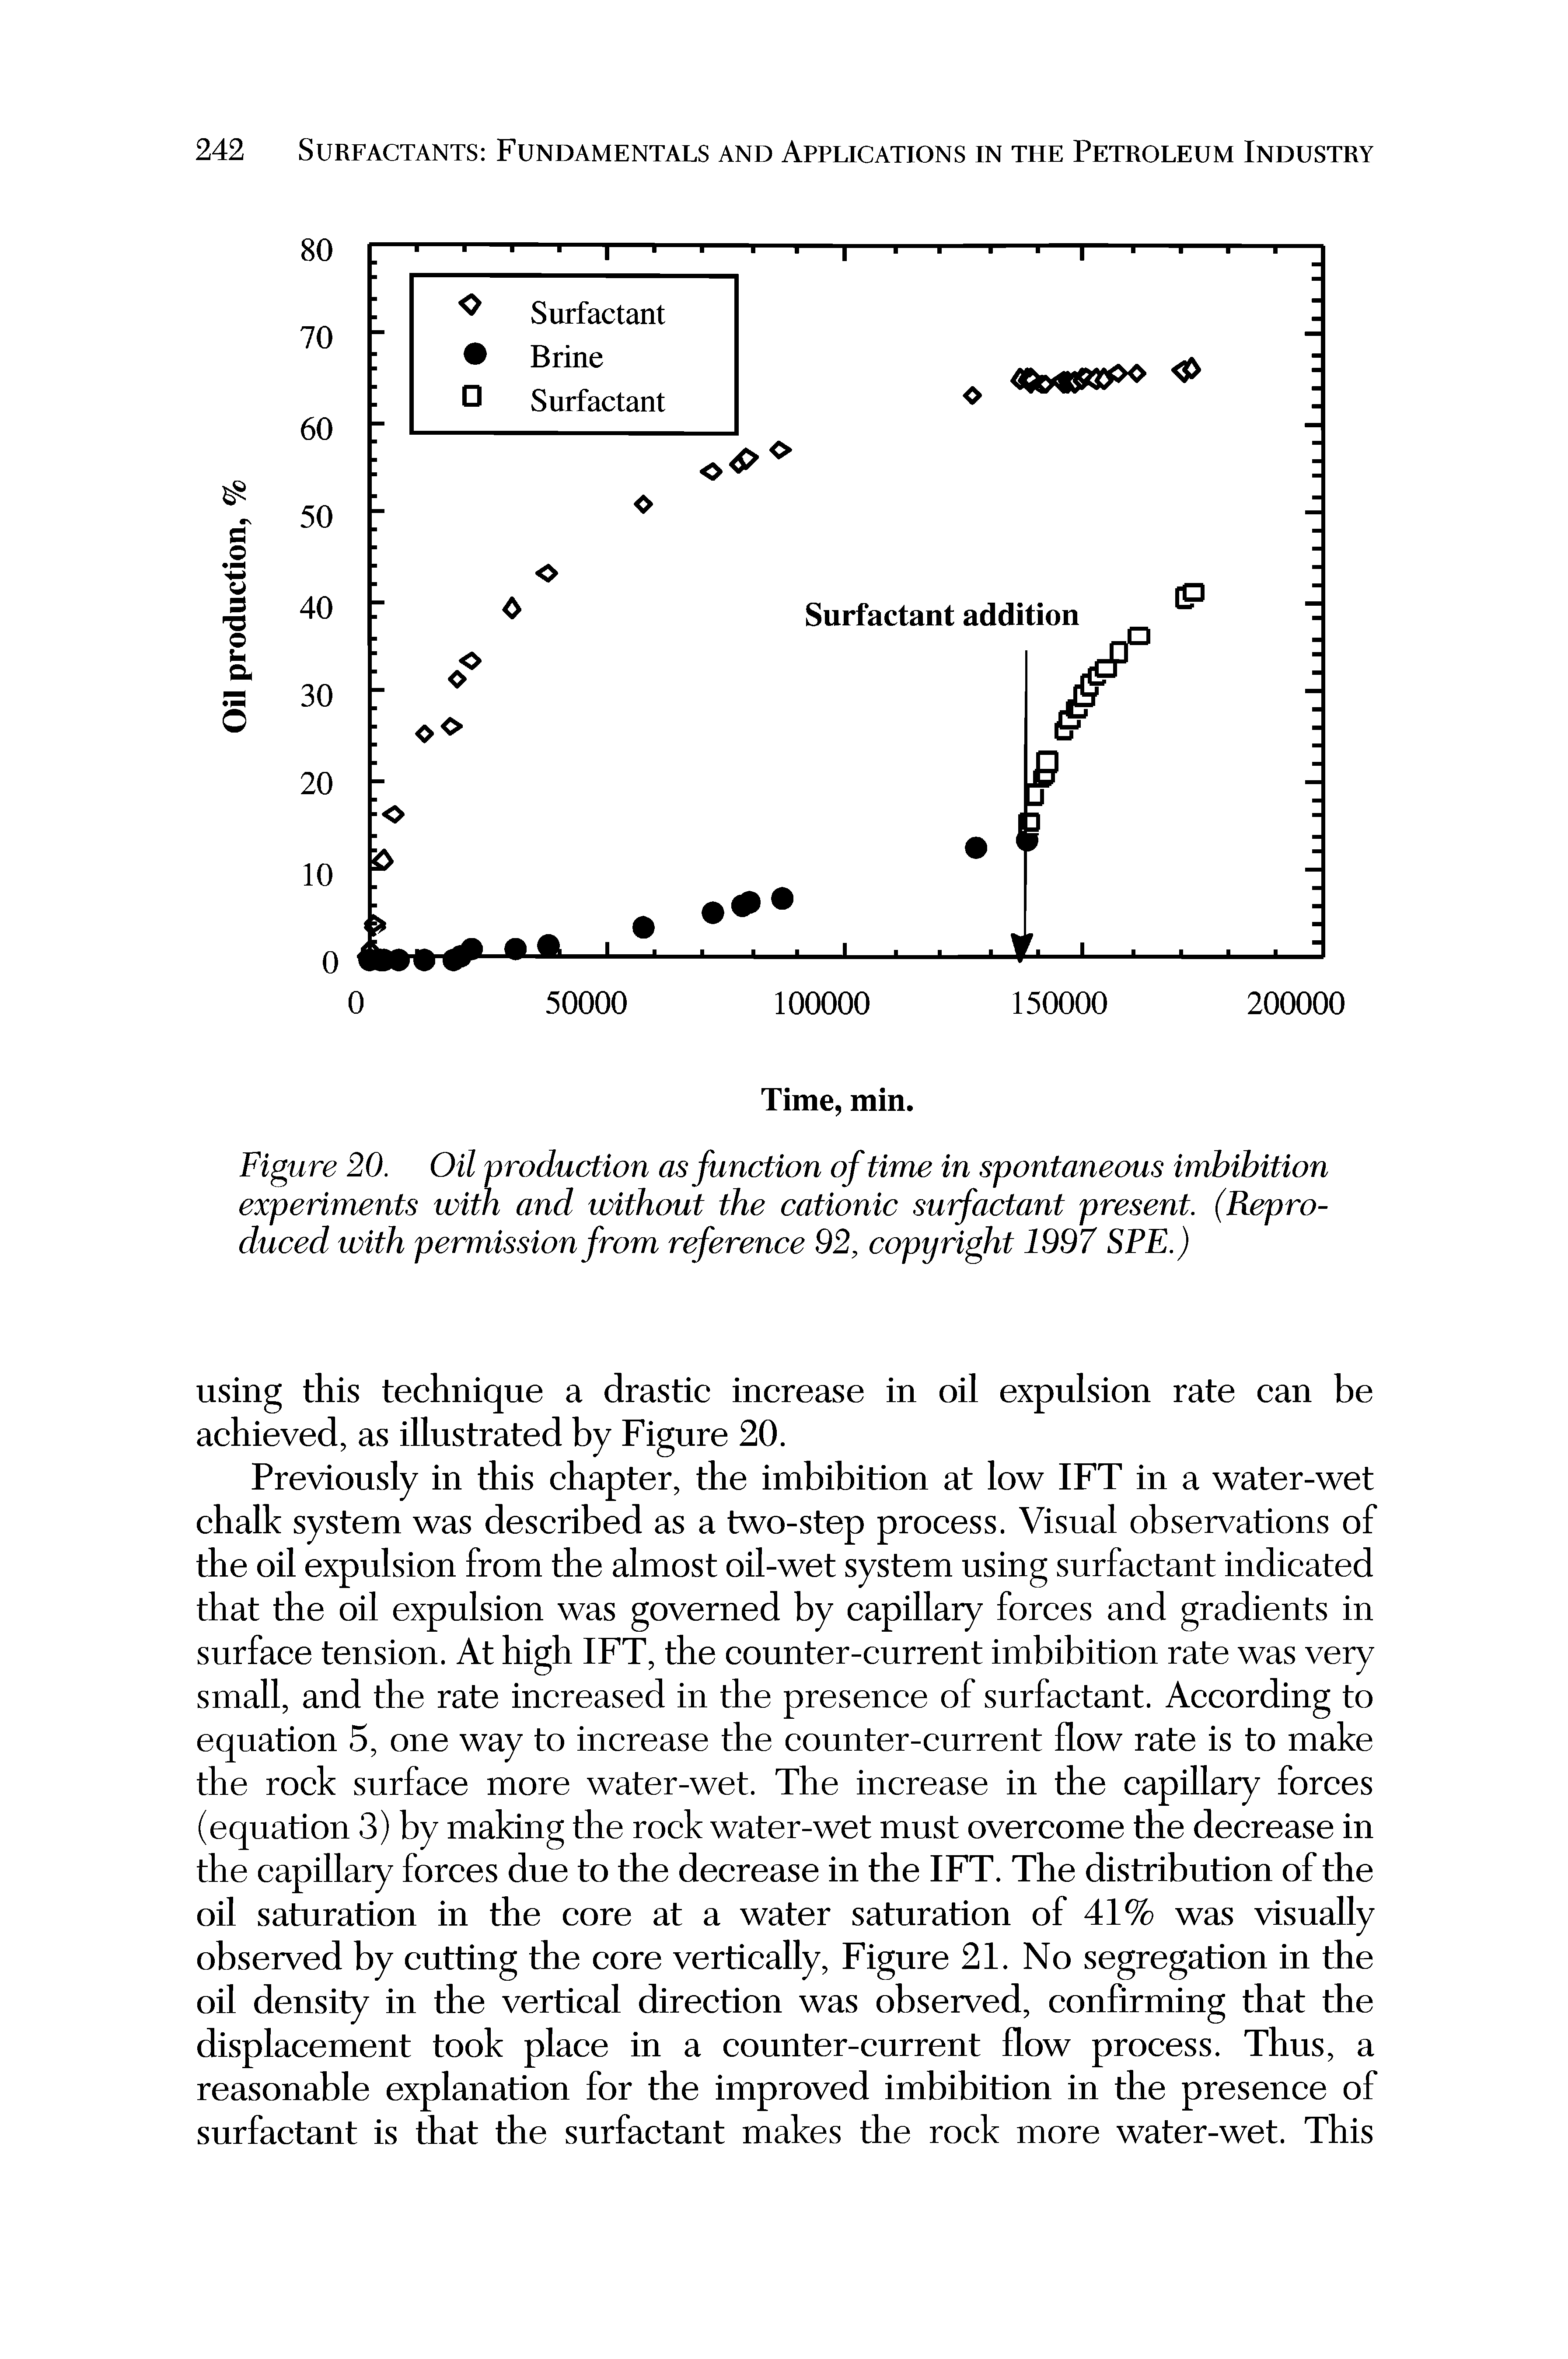 Figure 20. Oil production as function of time in spontaneous imbibition experiments with and without the cationic surfactant present. (Reproduced with permission from reference 92, copyright 1997 SPE.)...